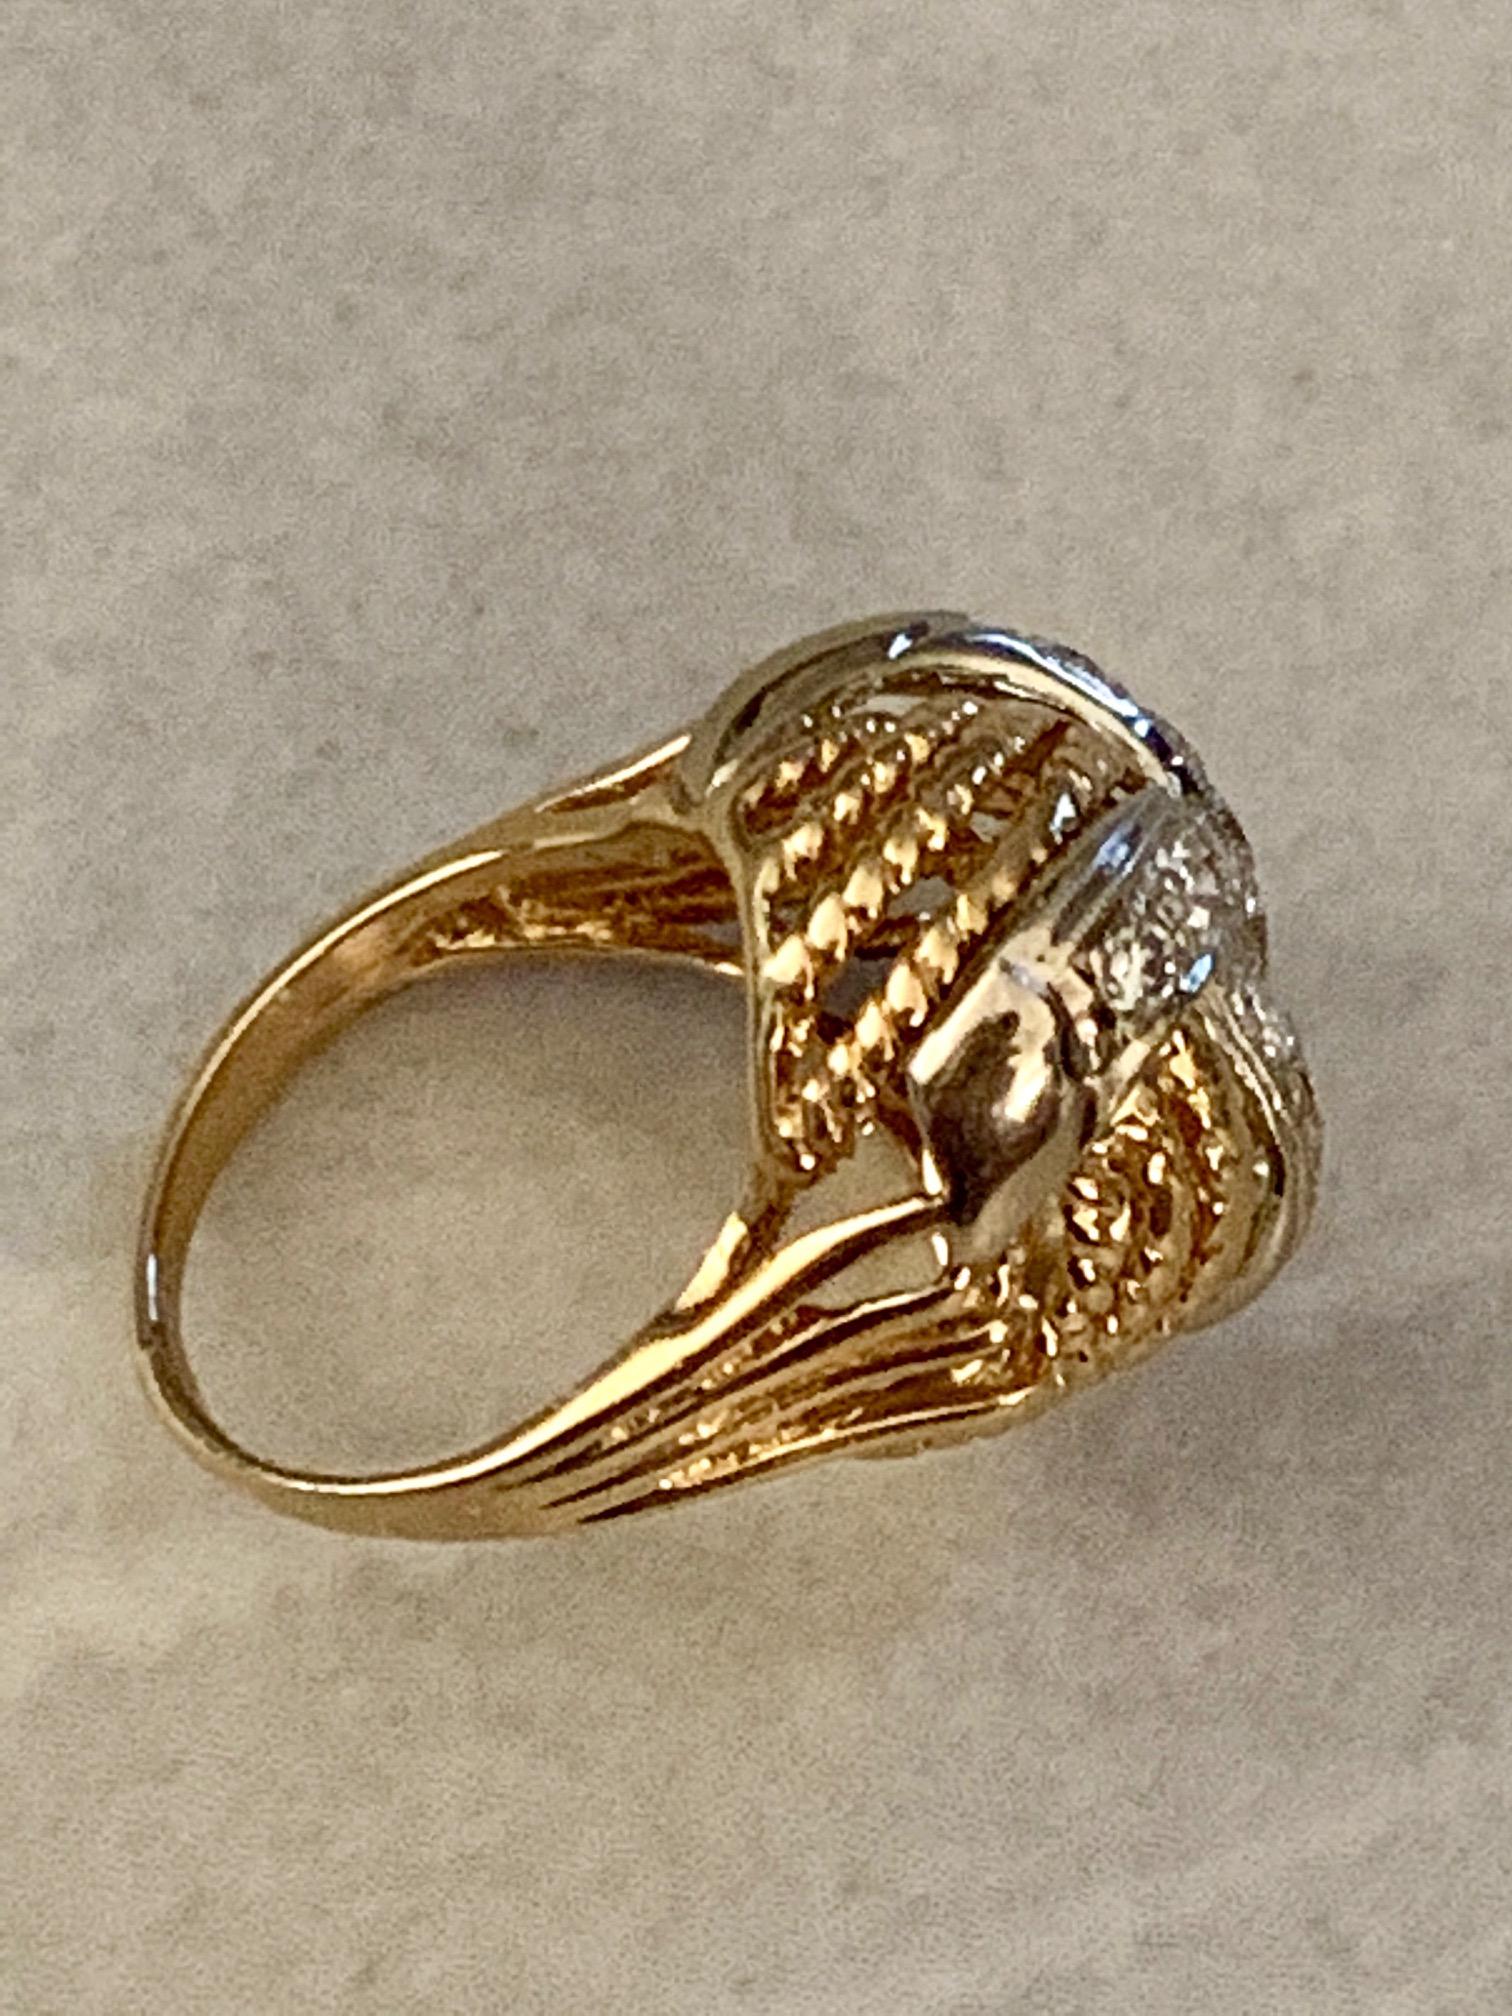 Now this is a dome ring!!  It features 13 brilliant cut Diamonds, totaling approximately 1.0ctw with average grades of VS-SI(I)-H.

The ring is 14 karat yellow Gold; the Diamonds are set in 14 karat white Gold.  

Size: 5 - This ring can be resized,